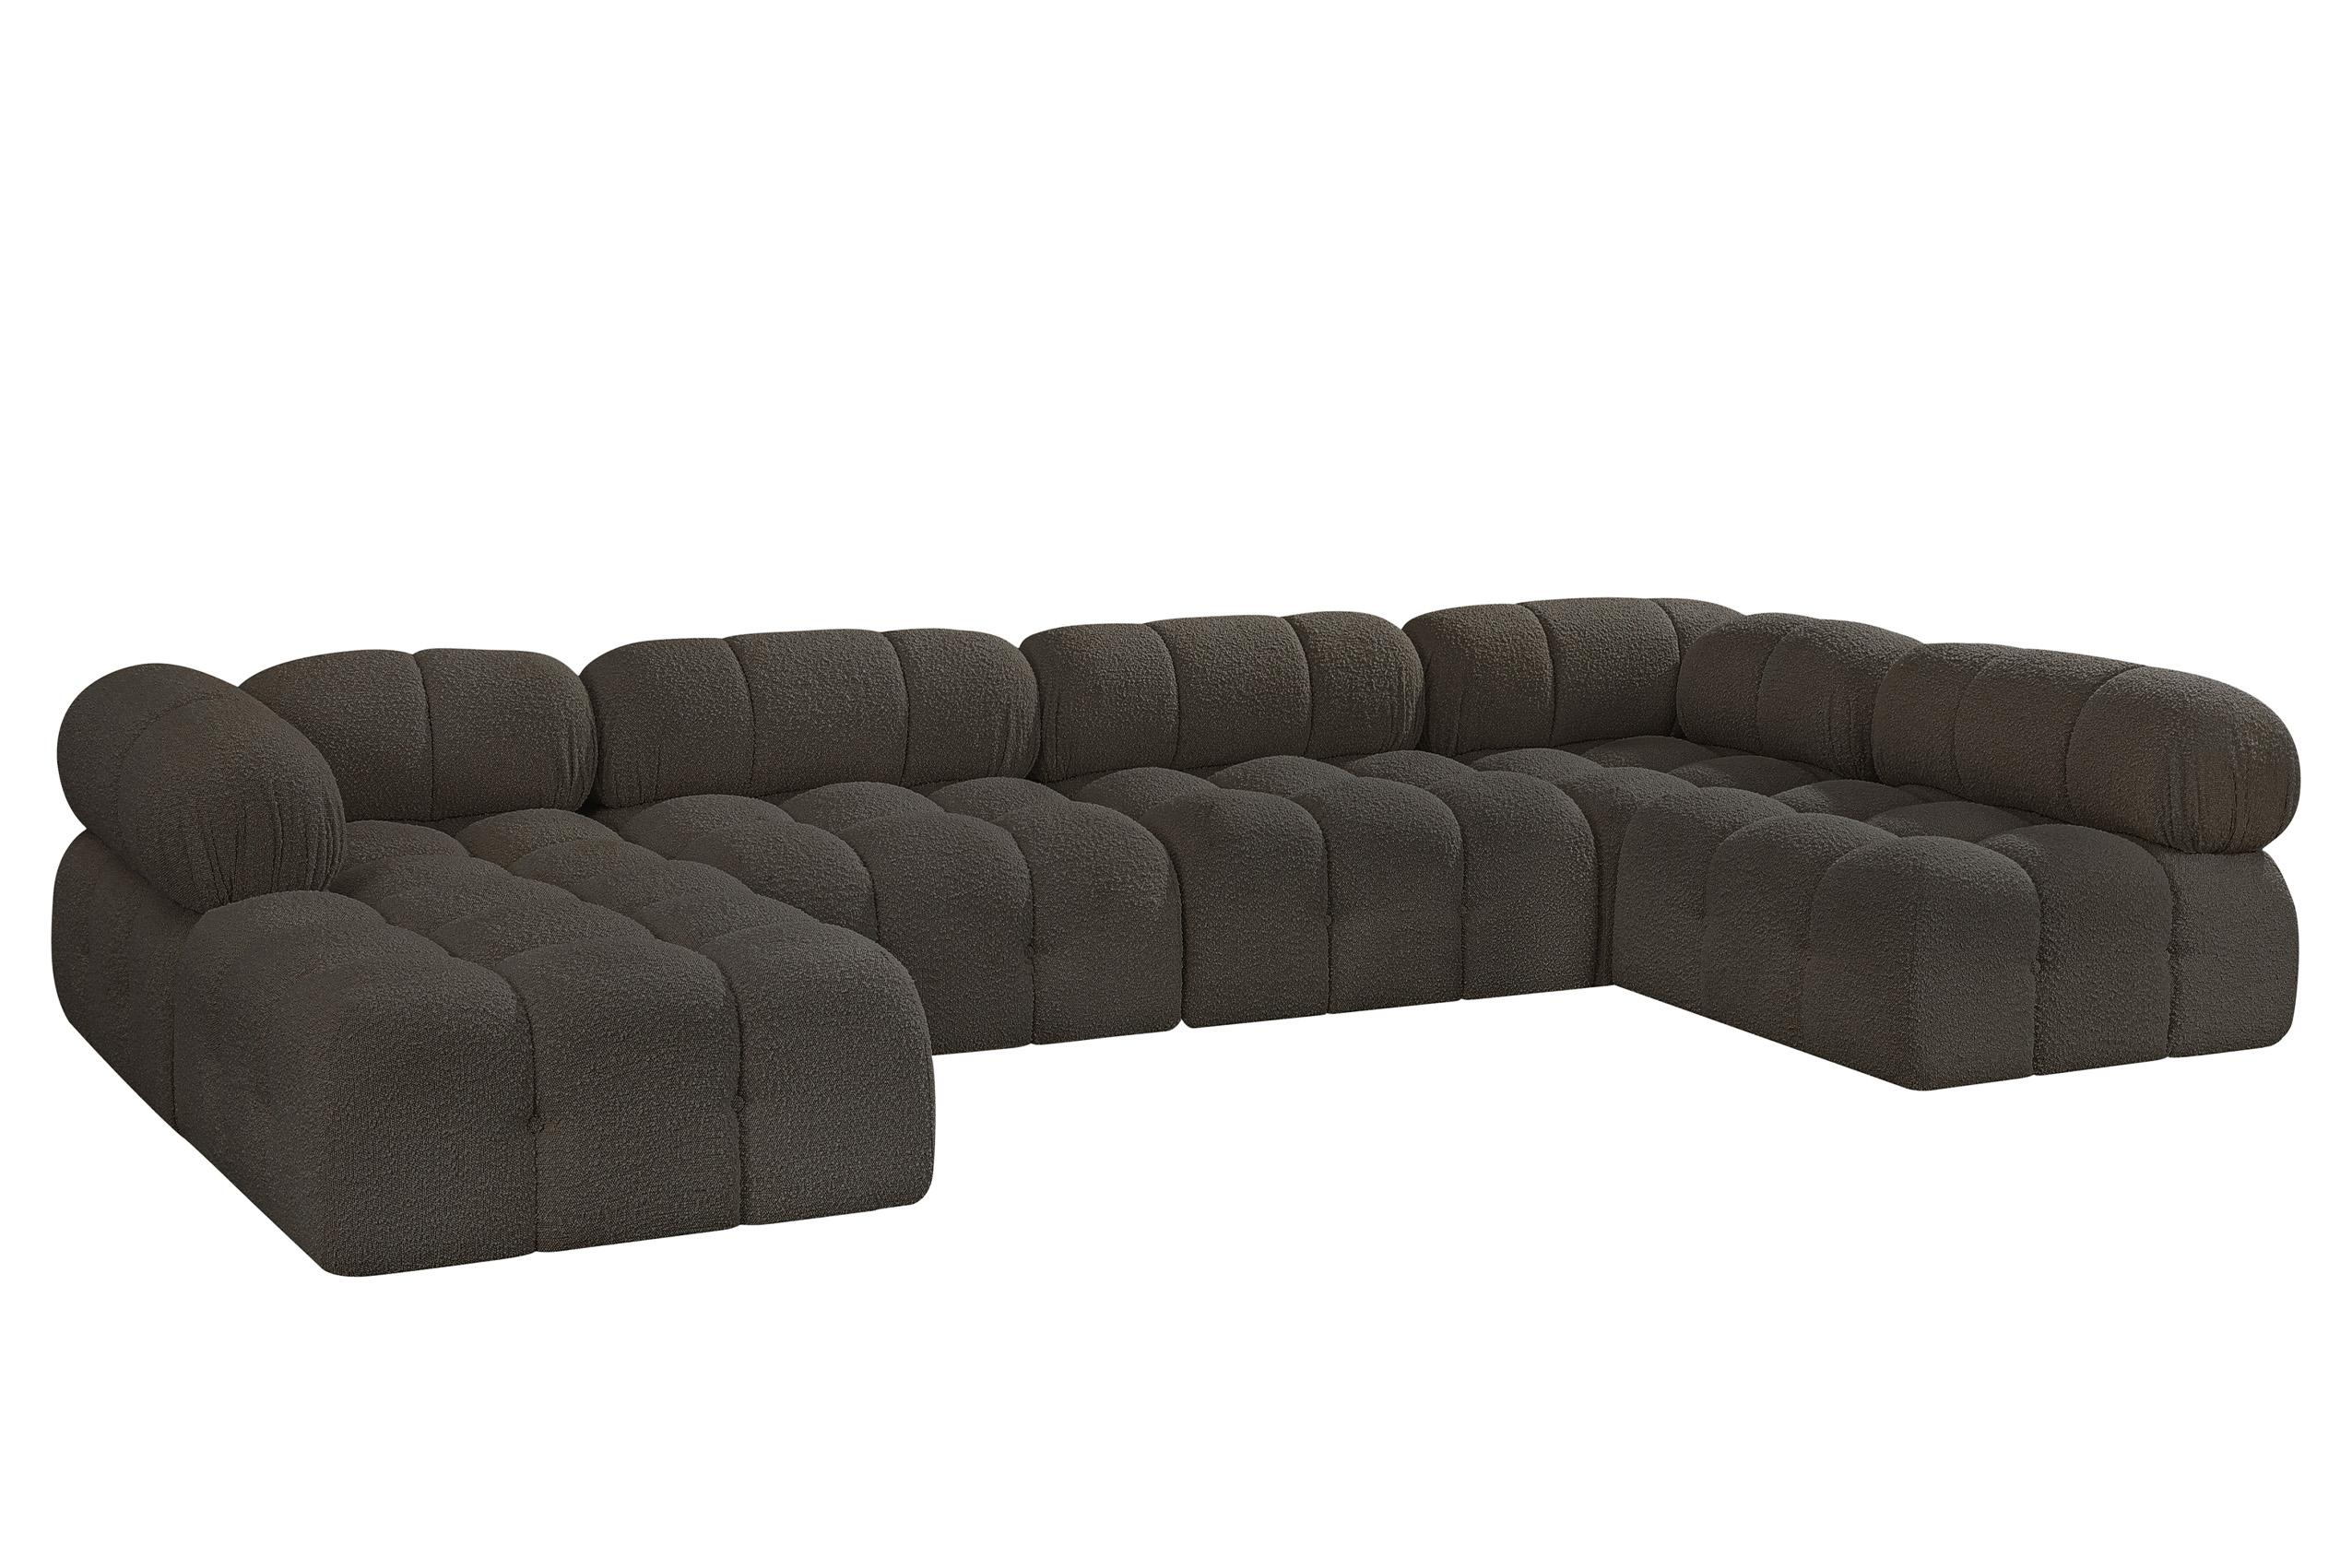 Contemporary, Modern Modular Sectional AMES 611Brown-Sec6A 611Brown-Sec6A in Brown 